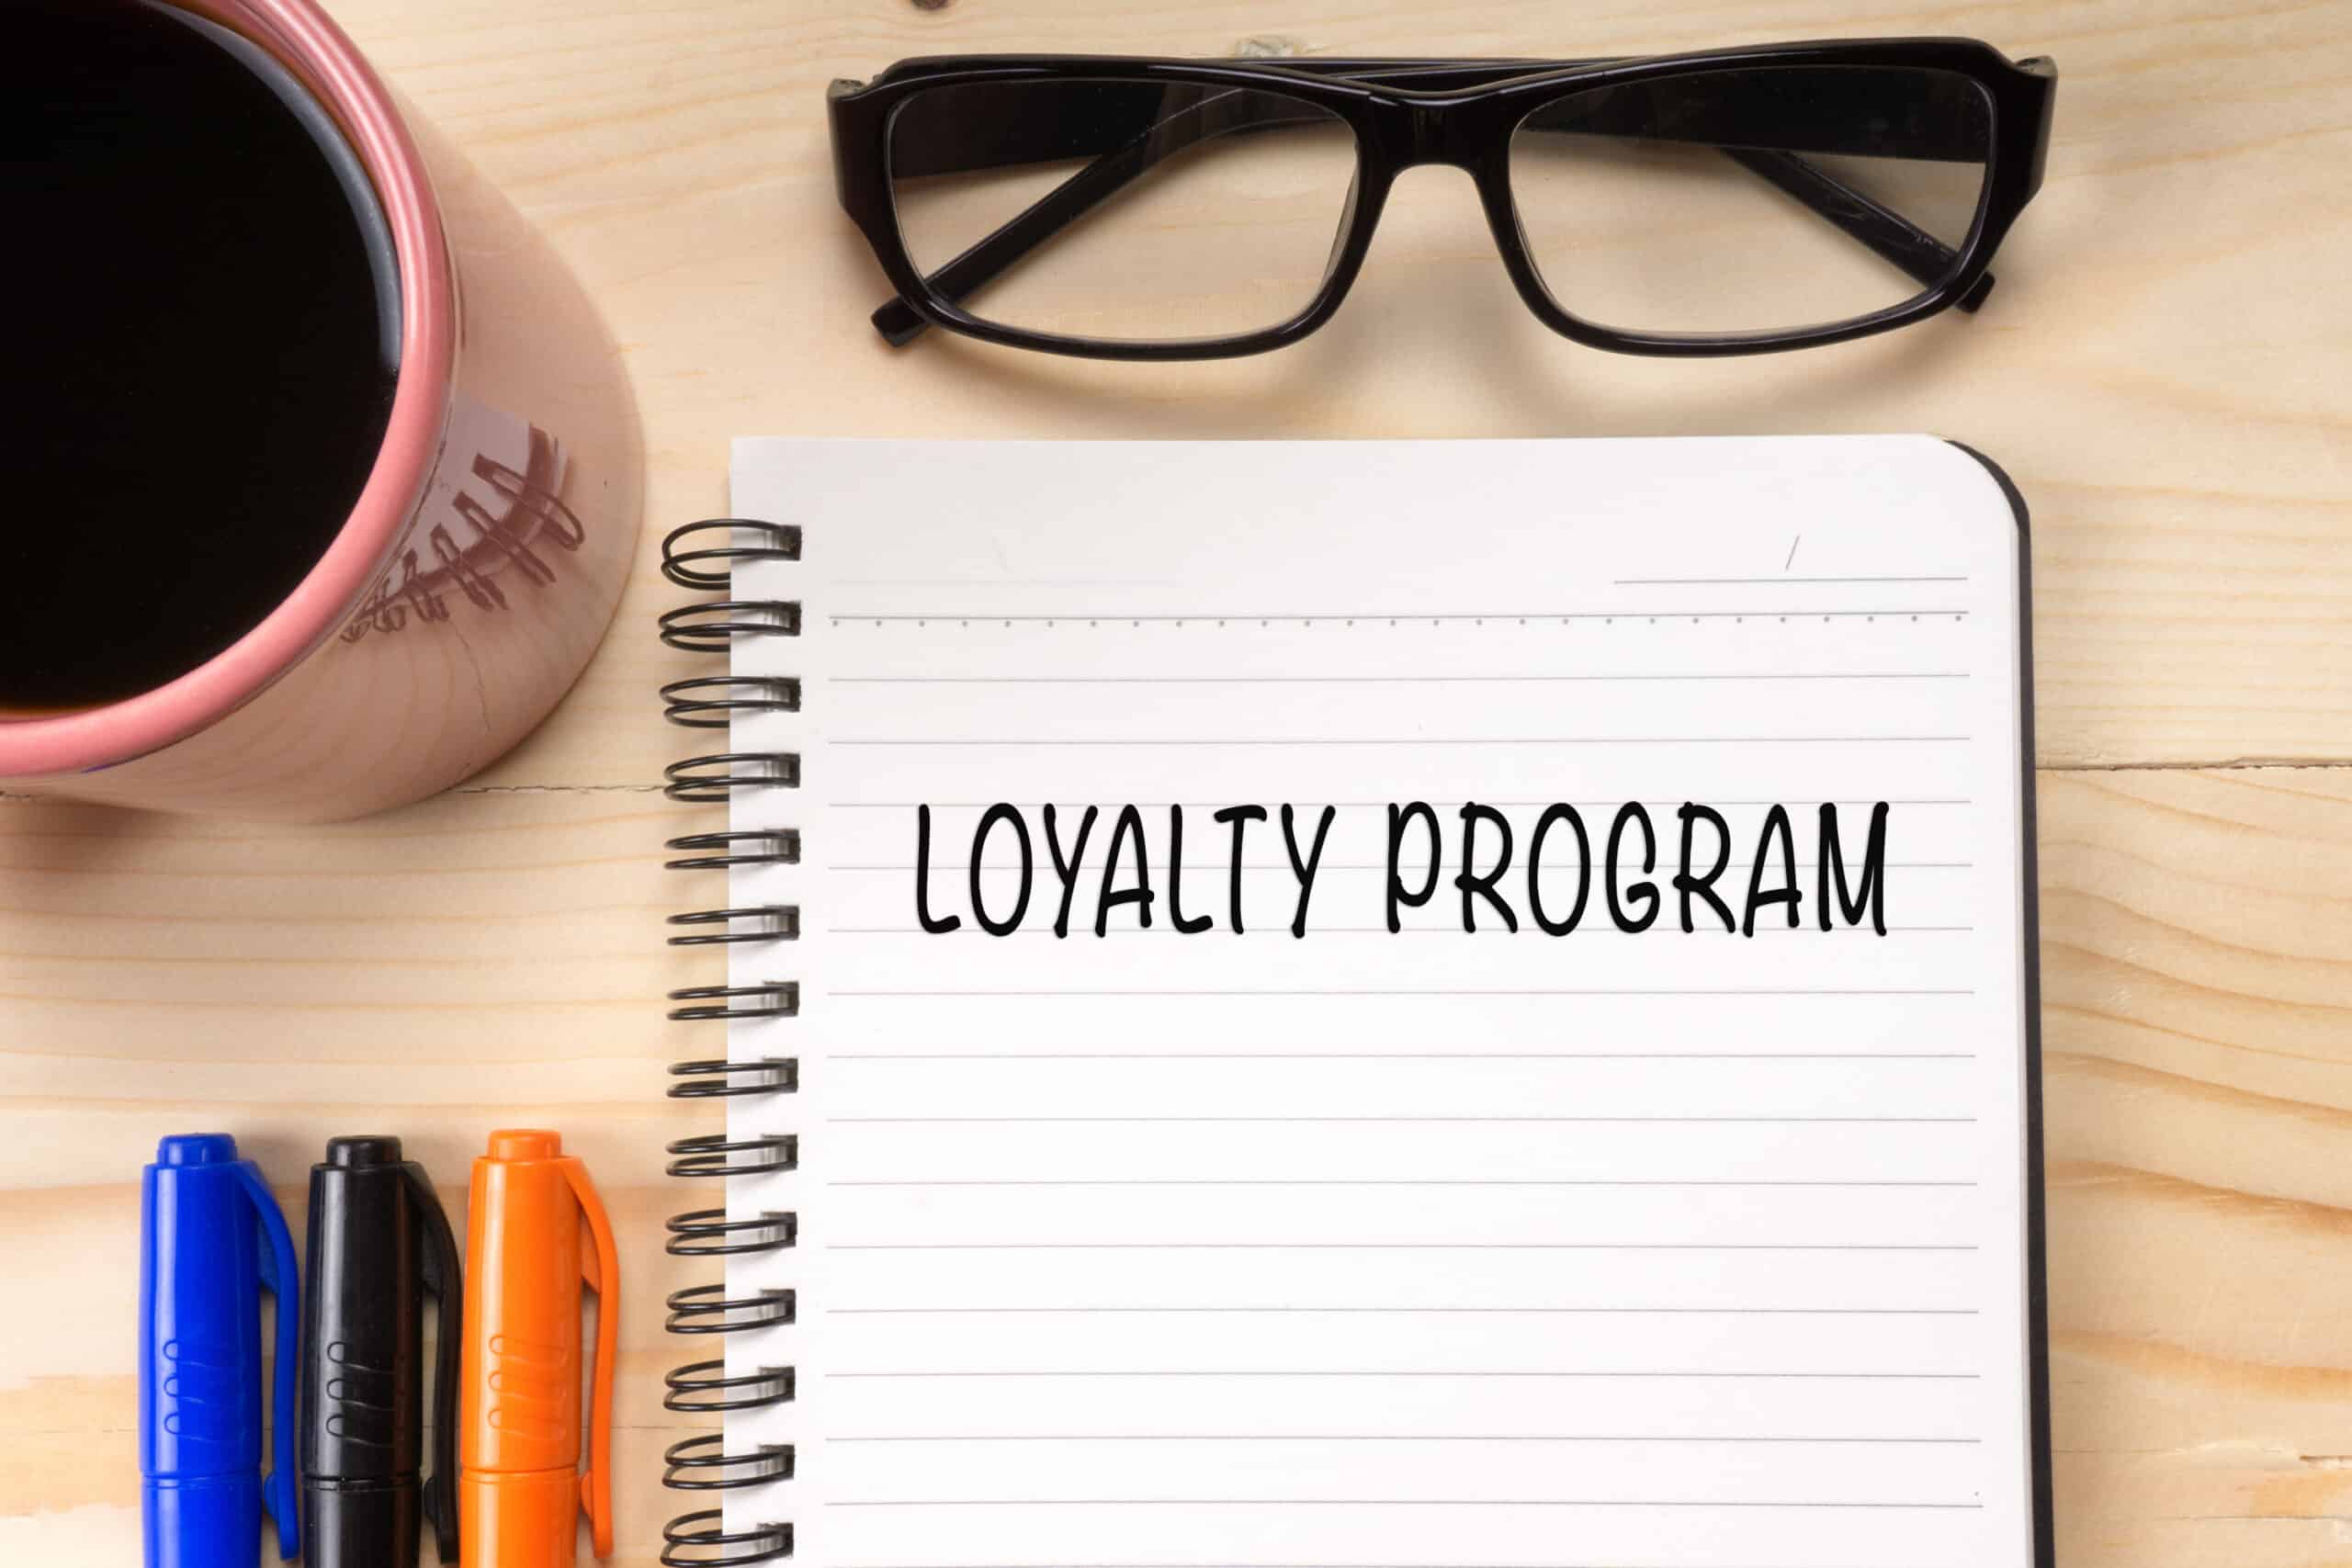 <p>Sign up for airline and hotel loyalty programs. Accumulating points can lead to free flights, upgrades, and stays. Even if you don’t travel frequently, these points can add up over time and lead to substantial savings.</p>